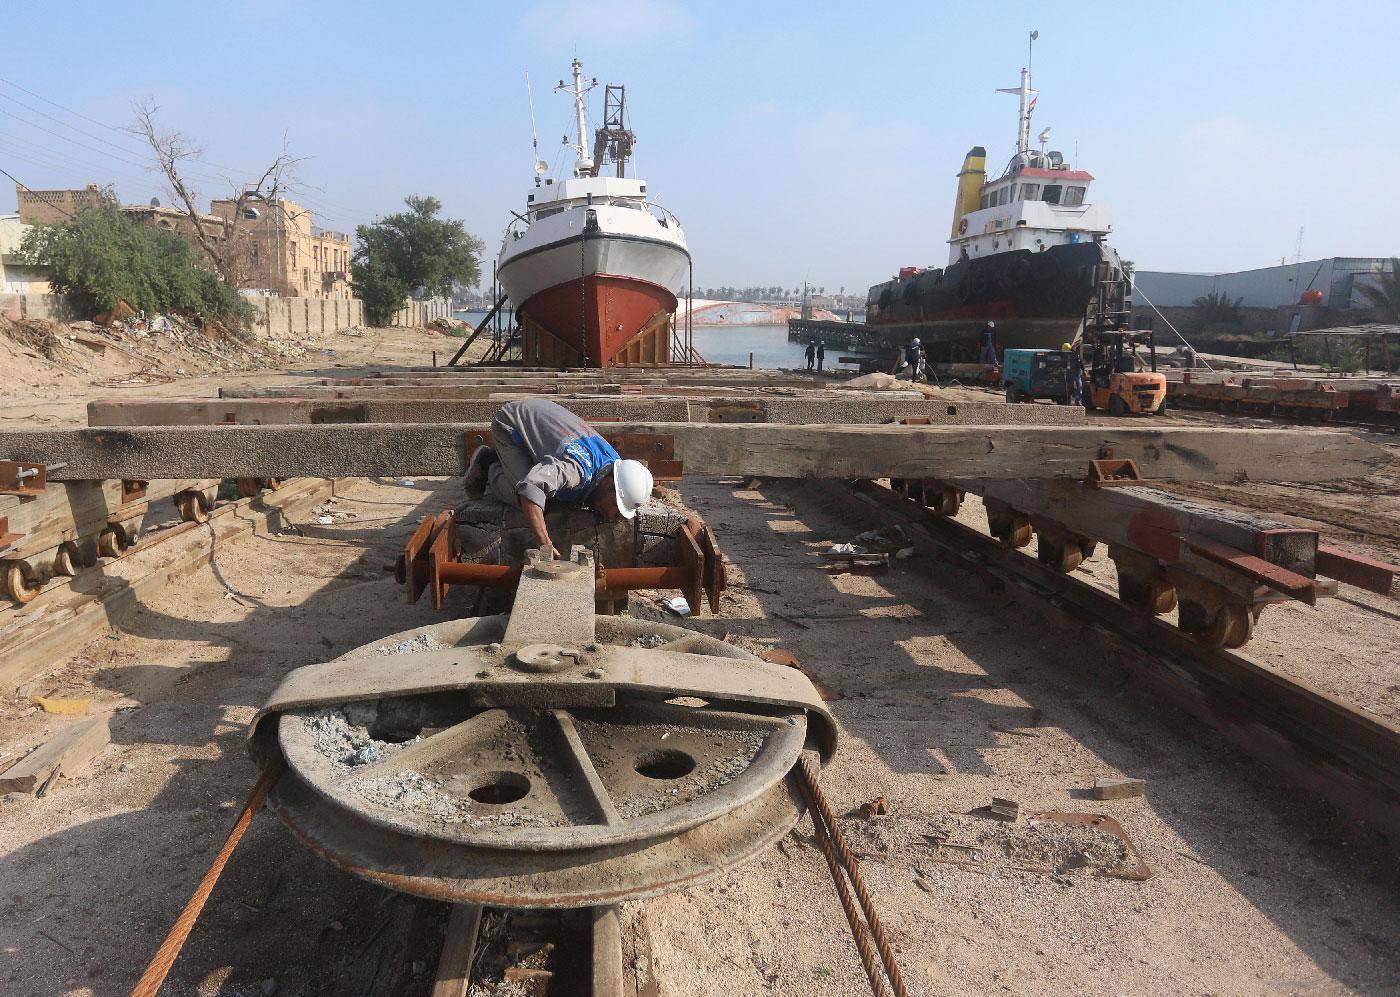 A worker inspects a pulley that pulls ships at a shipyard built by the British Army on Basra's docks in 1918, in Basra, Iraq December 23, 2018.